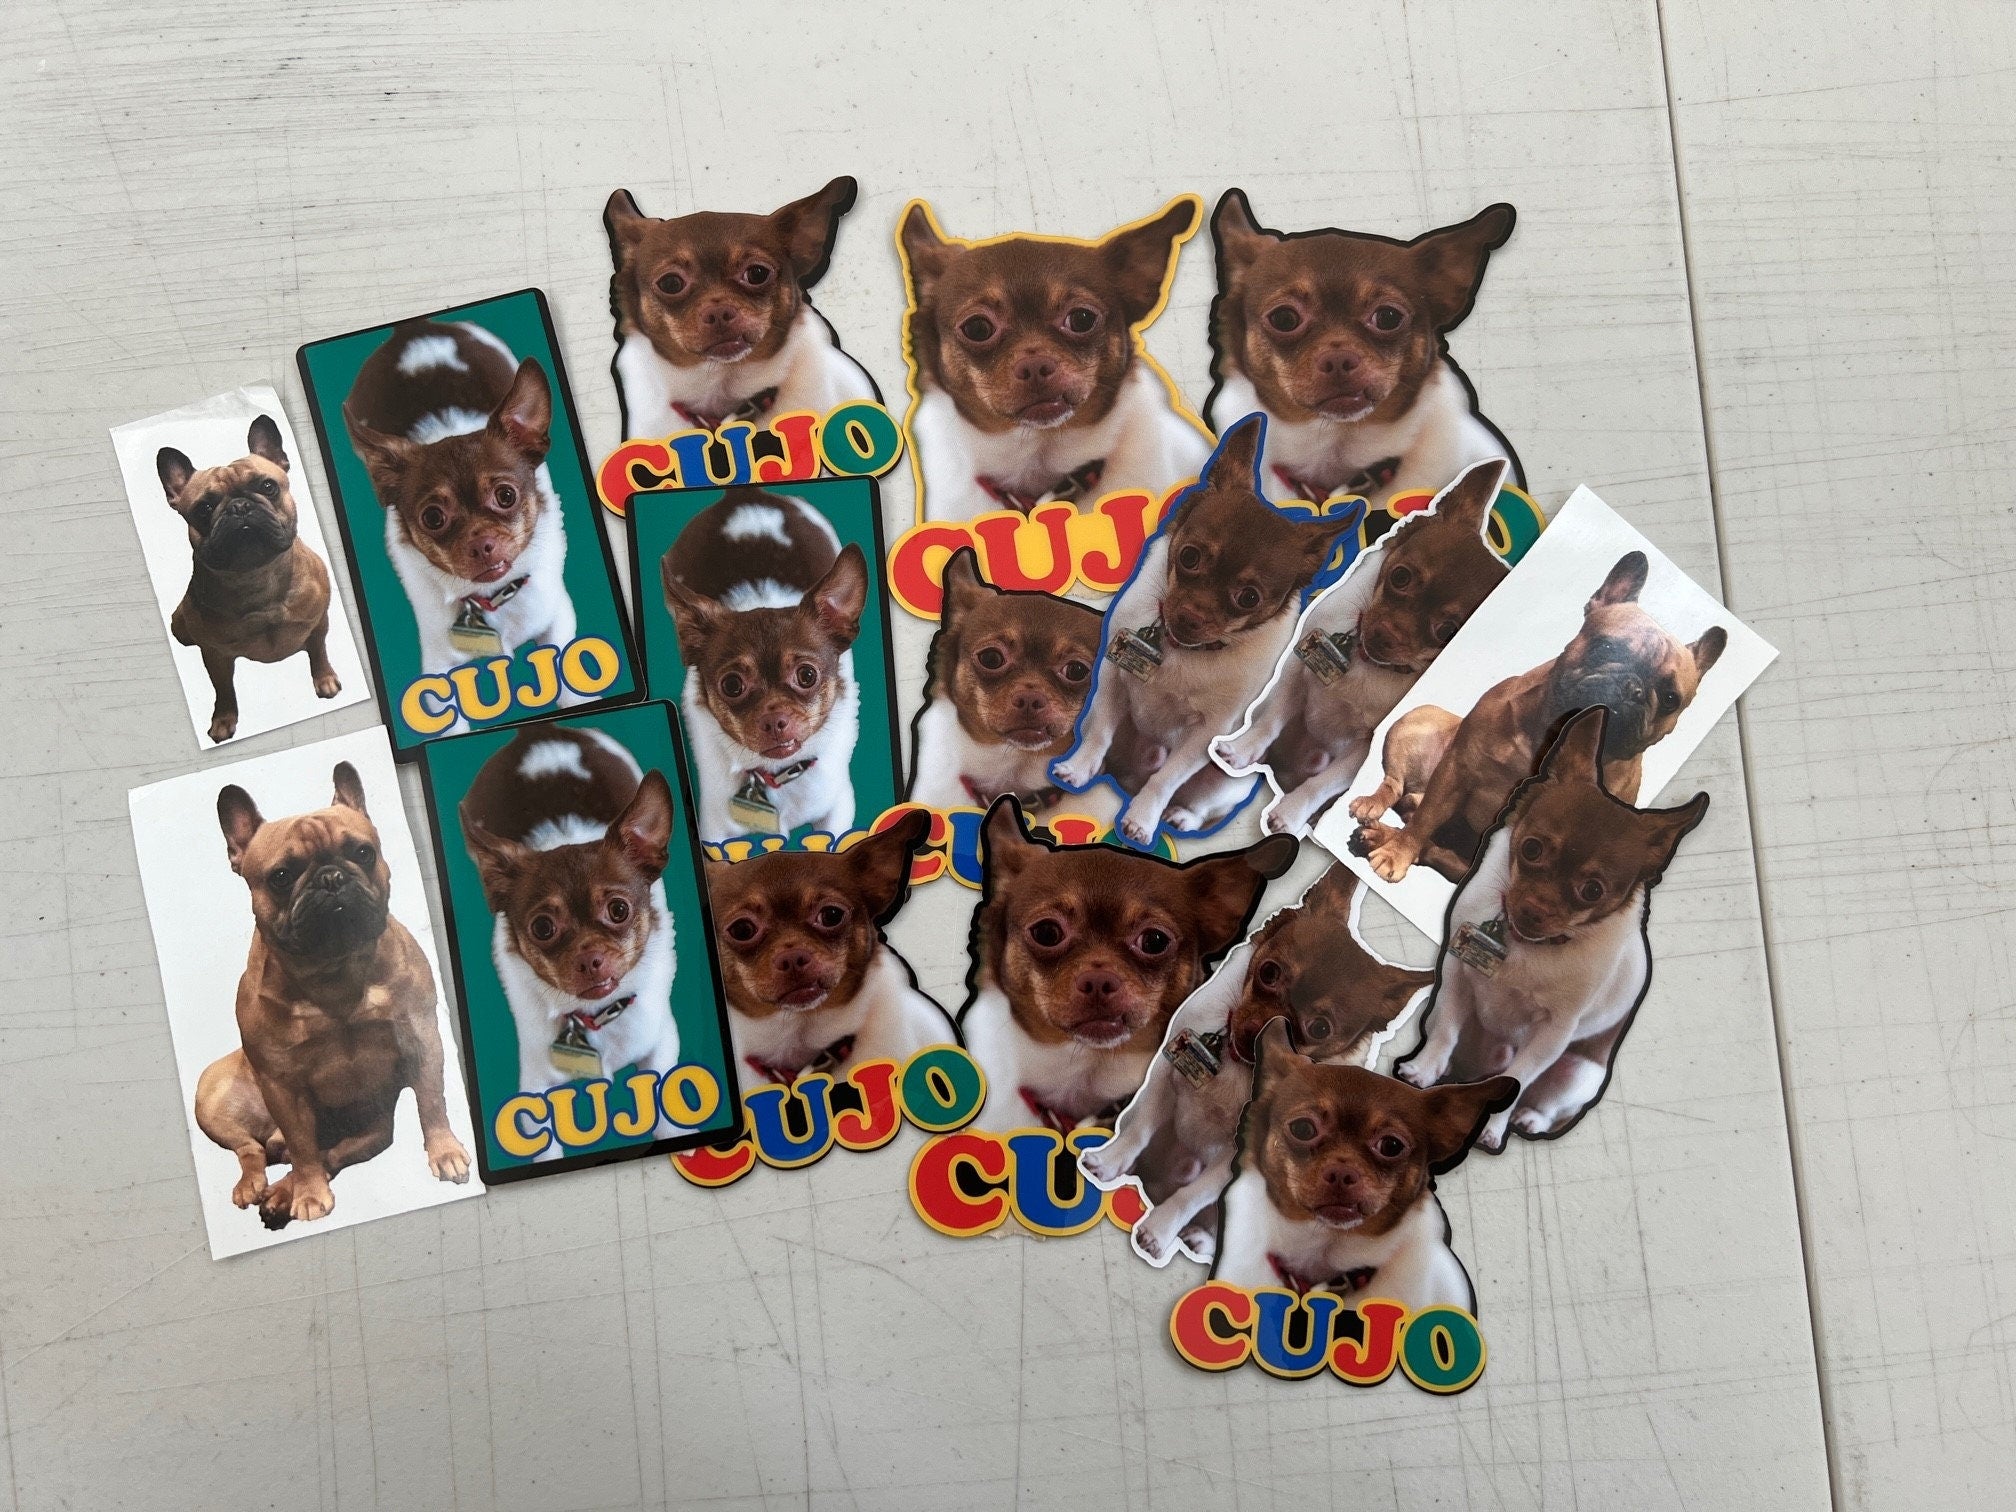 Personalized Pet Stickers, Dog Decals, Cat Decals, Stickers, Custom Pet Sticker, Pet Photo Sticker, Water Proof Pet Stickers